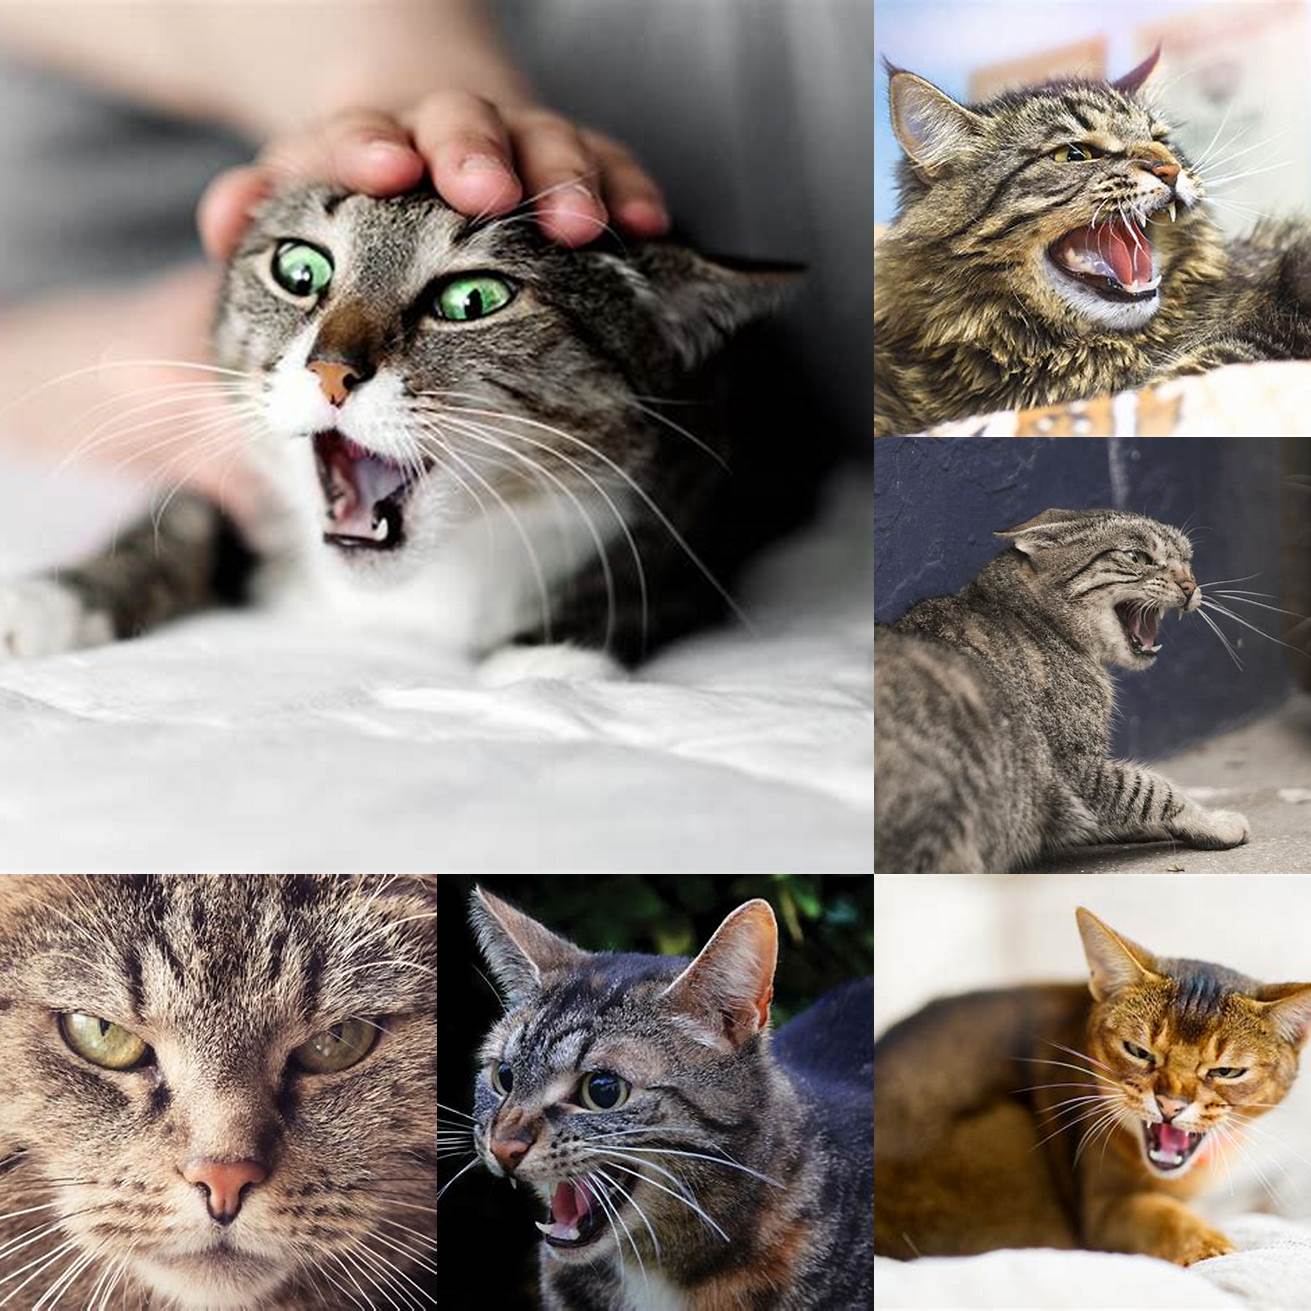 Stay calm and avoid punishing your cats for aggressive behavior This can escalate the behavior and cause further stress